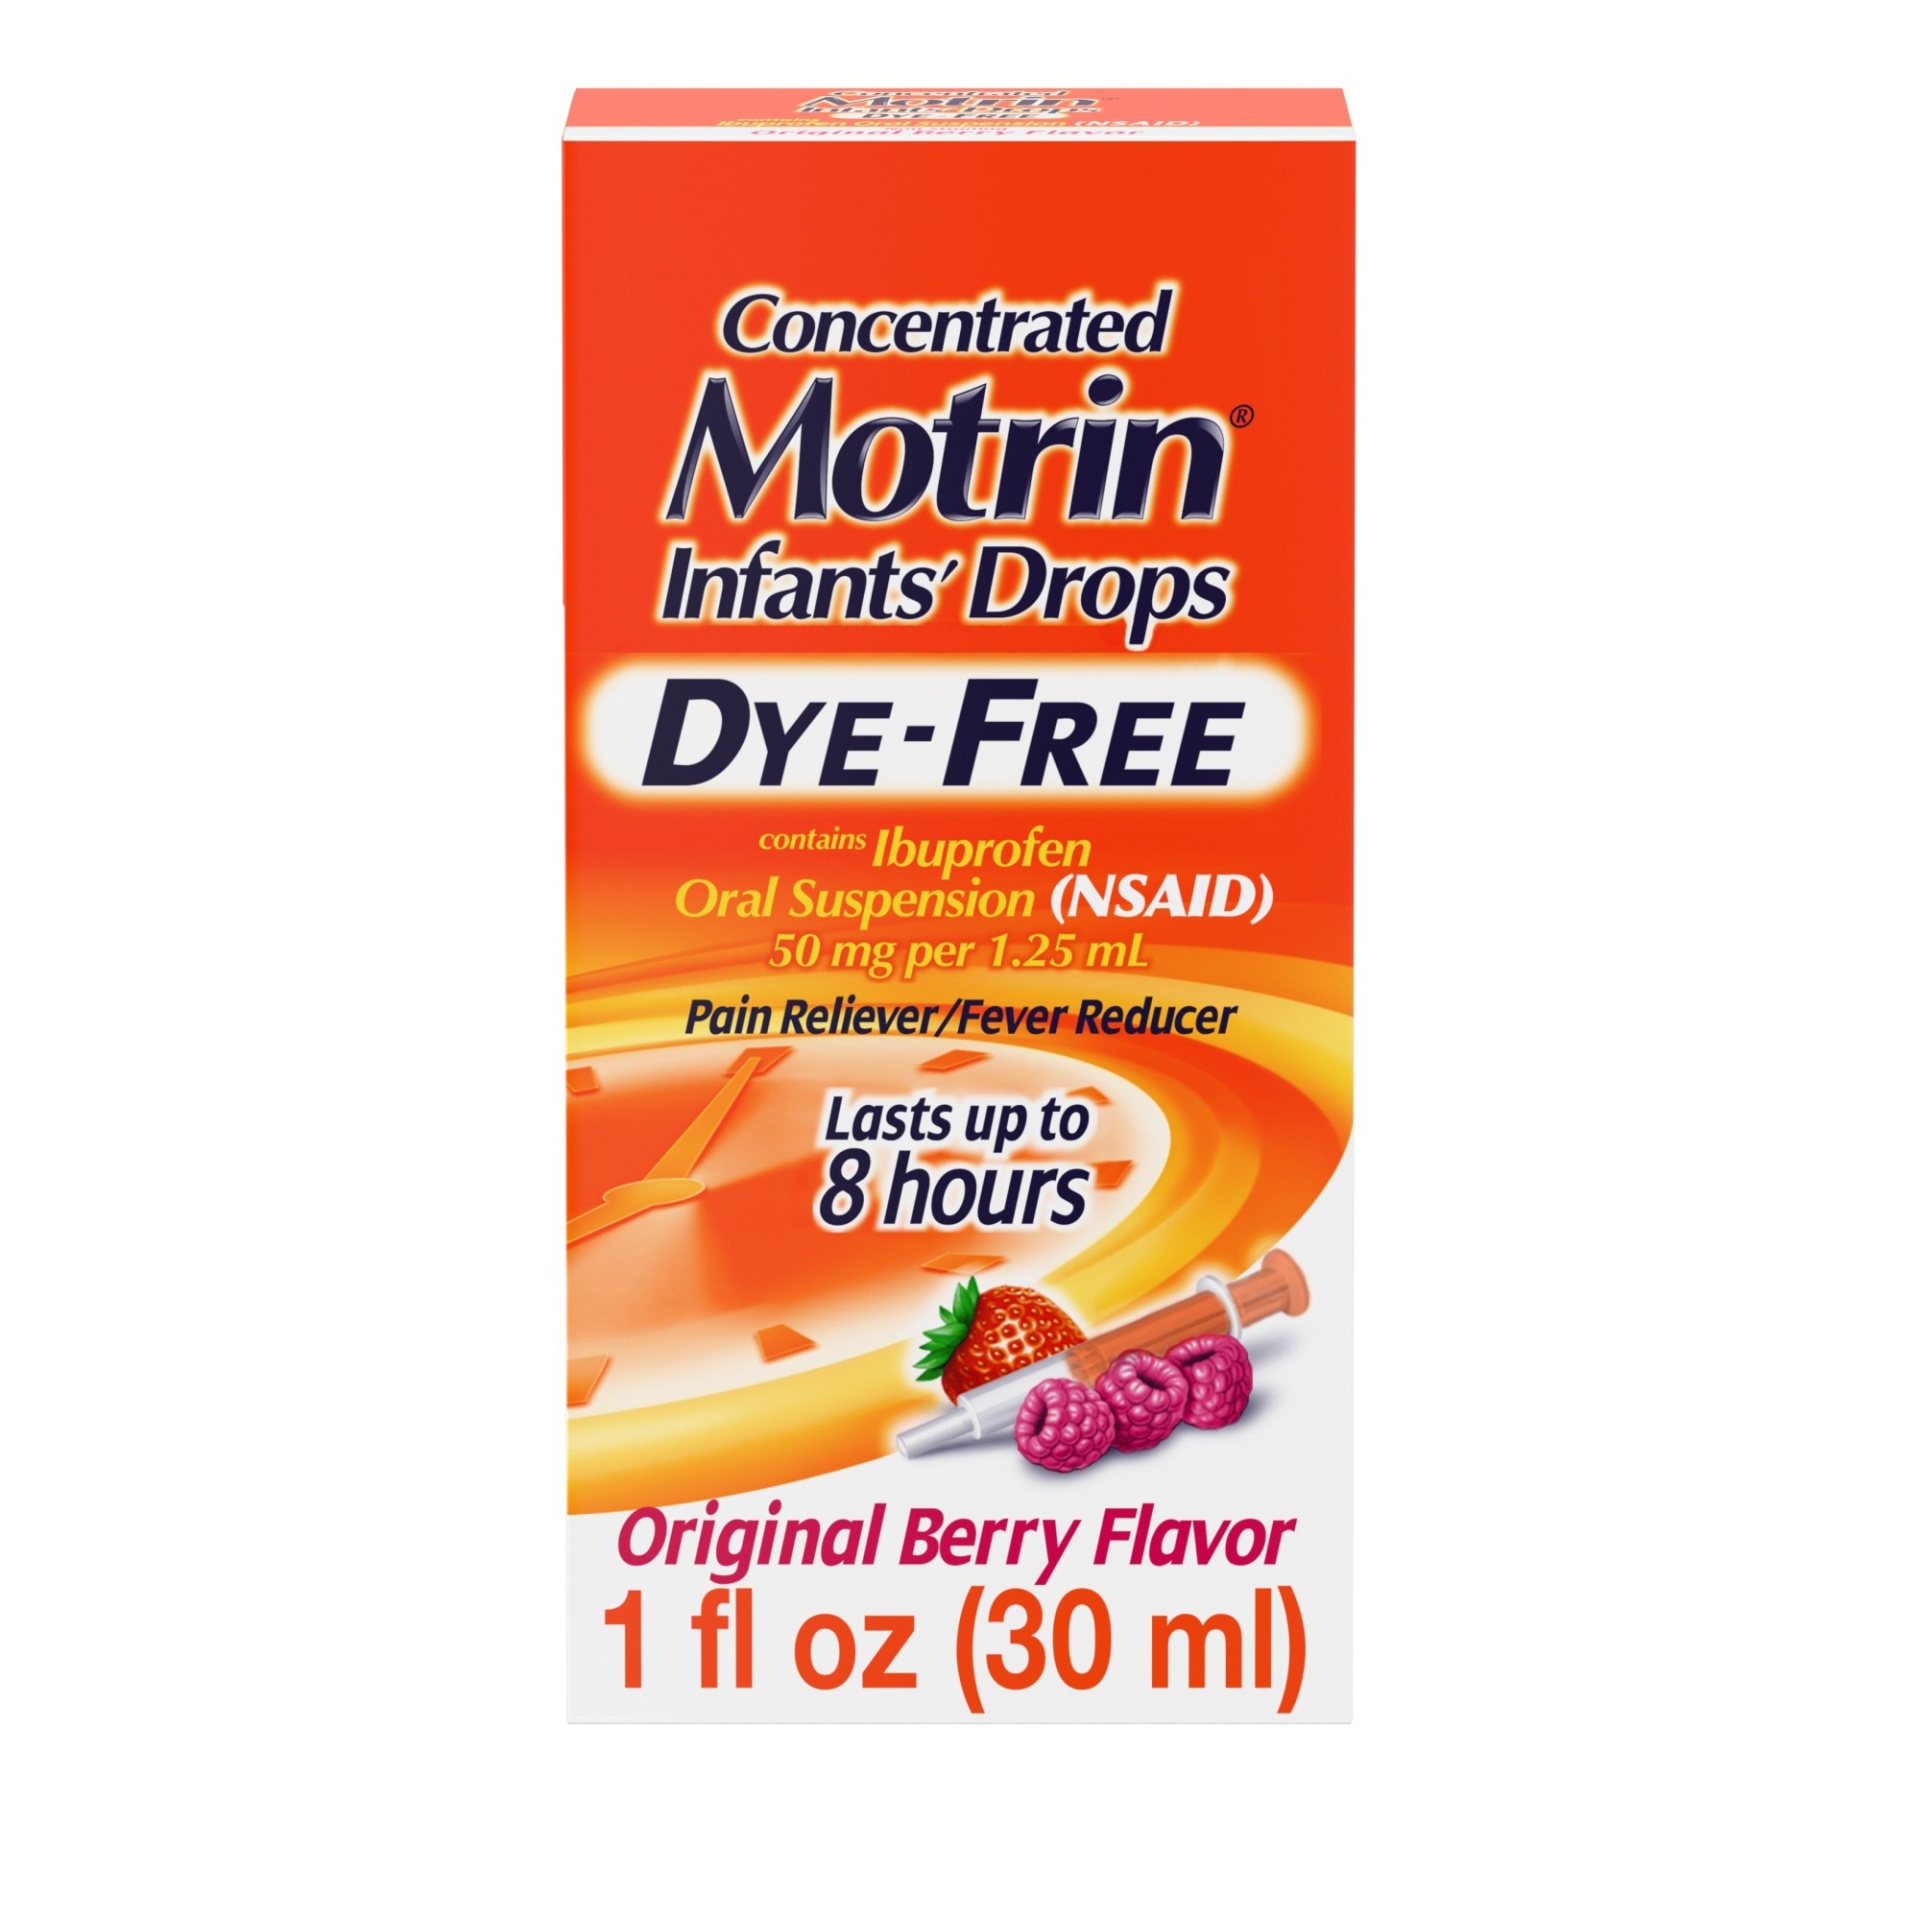 slide 1 of 6, Infants' Motrin Oral Suspension Concentrated Liquid Medicine Drops with Ibuprofen, NSAID Fever Reducer & Pain Reliever for Babies, Dye Free, Alcohol-Free, Berry Flavored, 1 fl oz